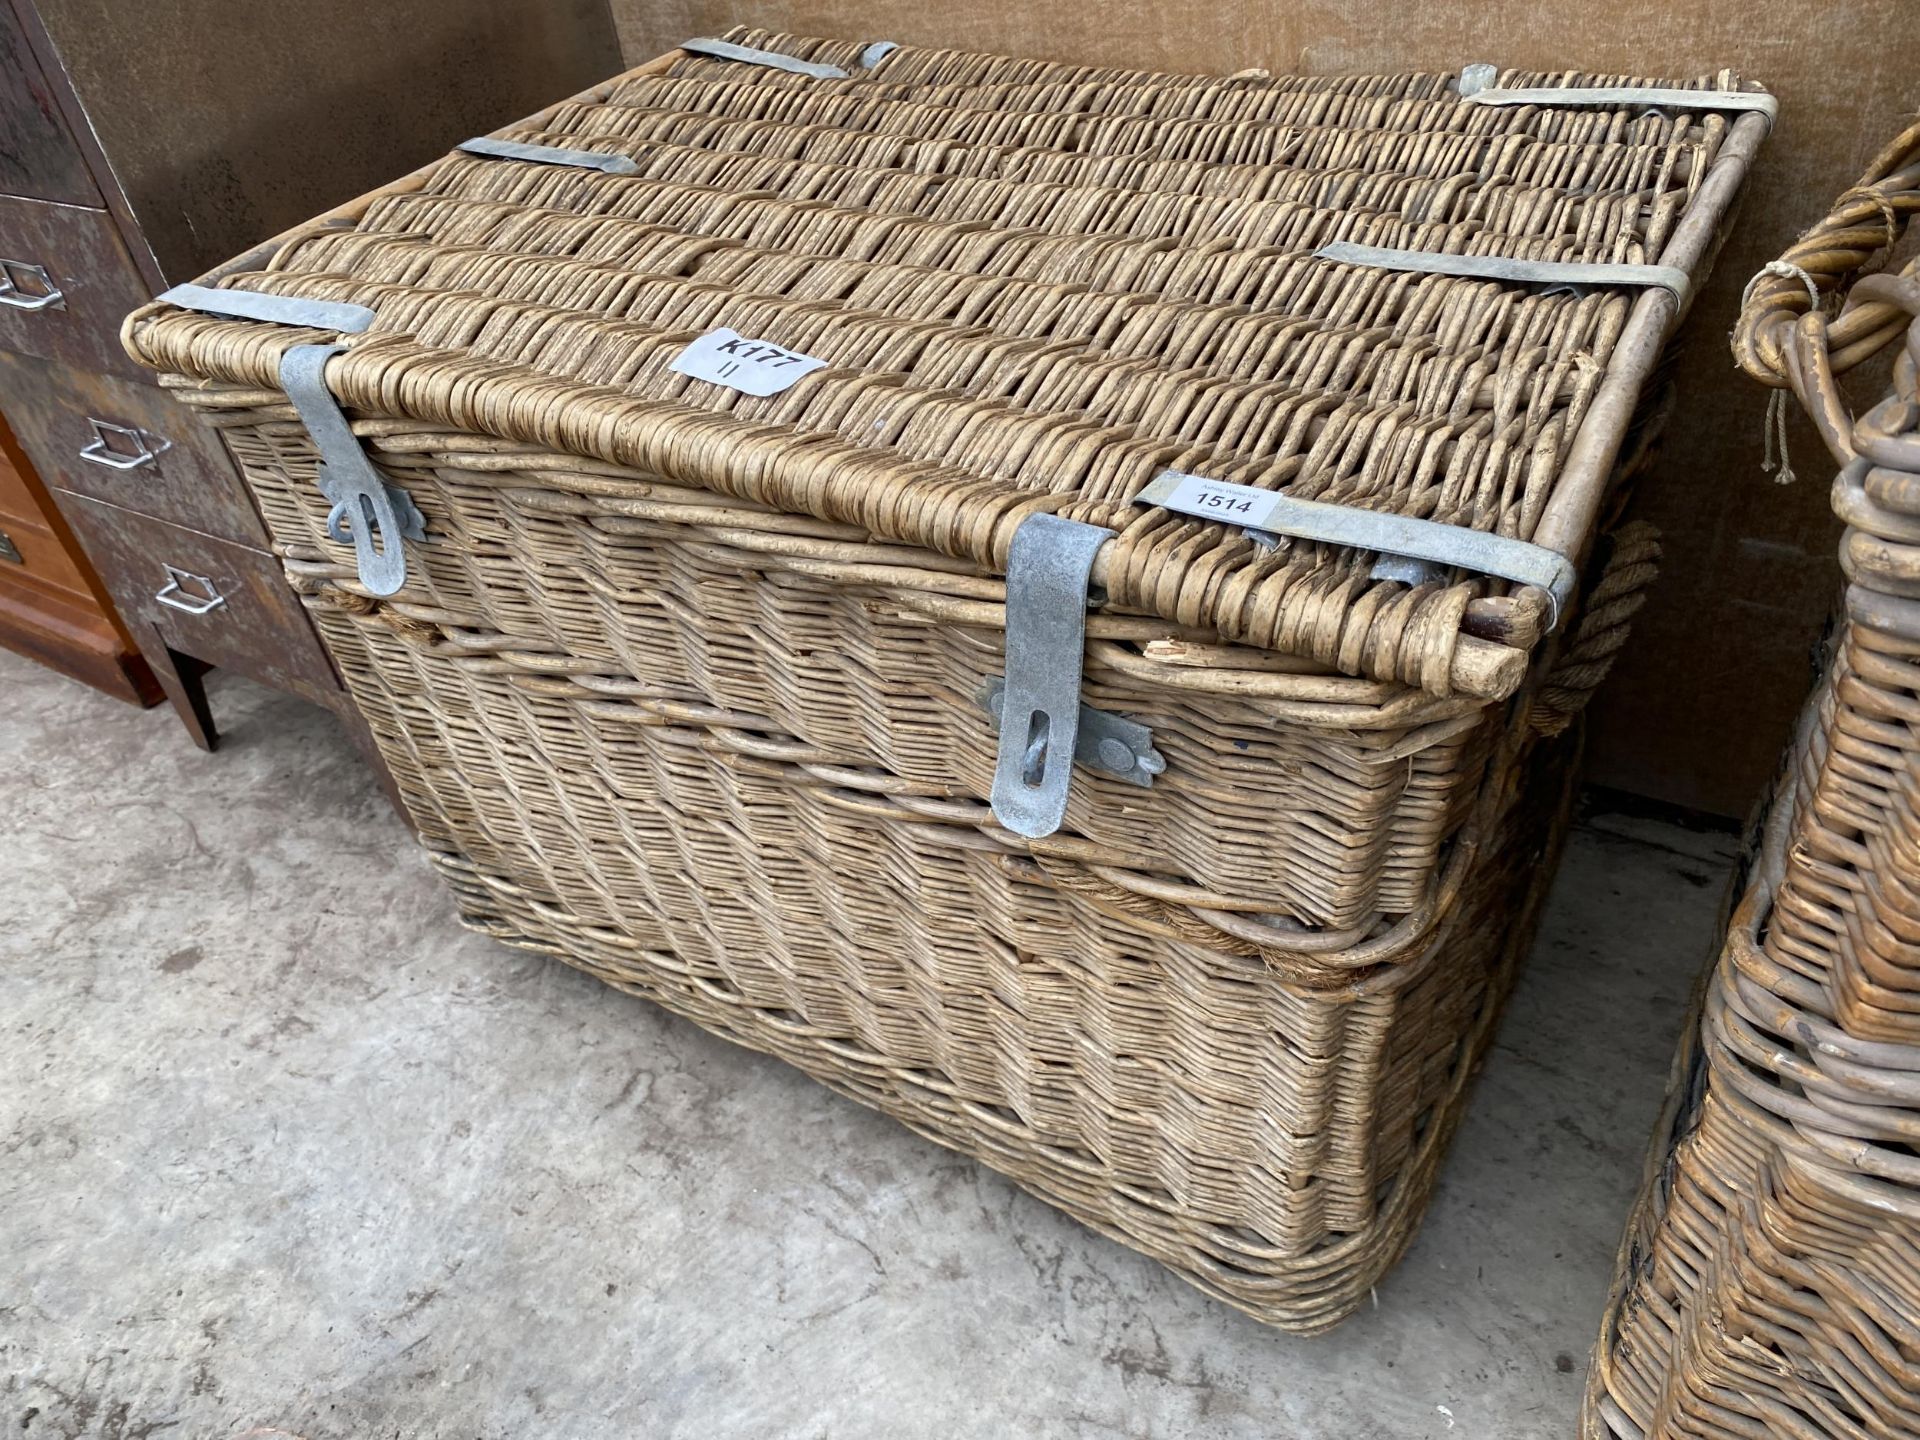 A LARGE WICKER LOG BASKET WITH HINGED LID AND METAL BANDING - Image 2 of 6